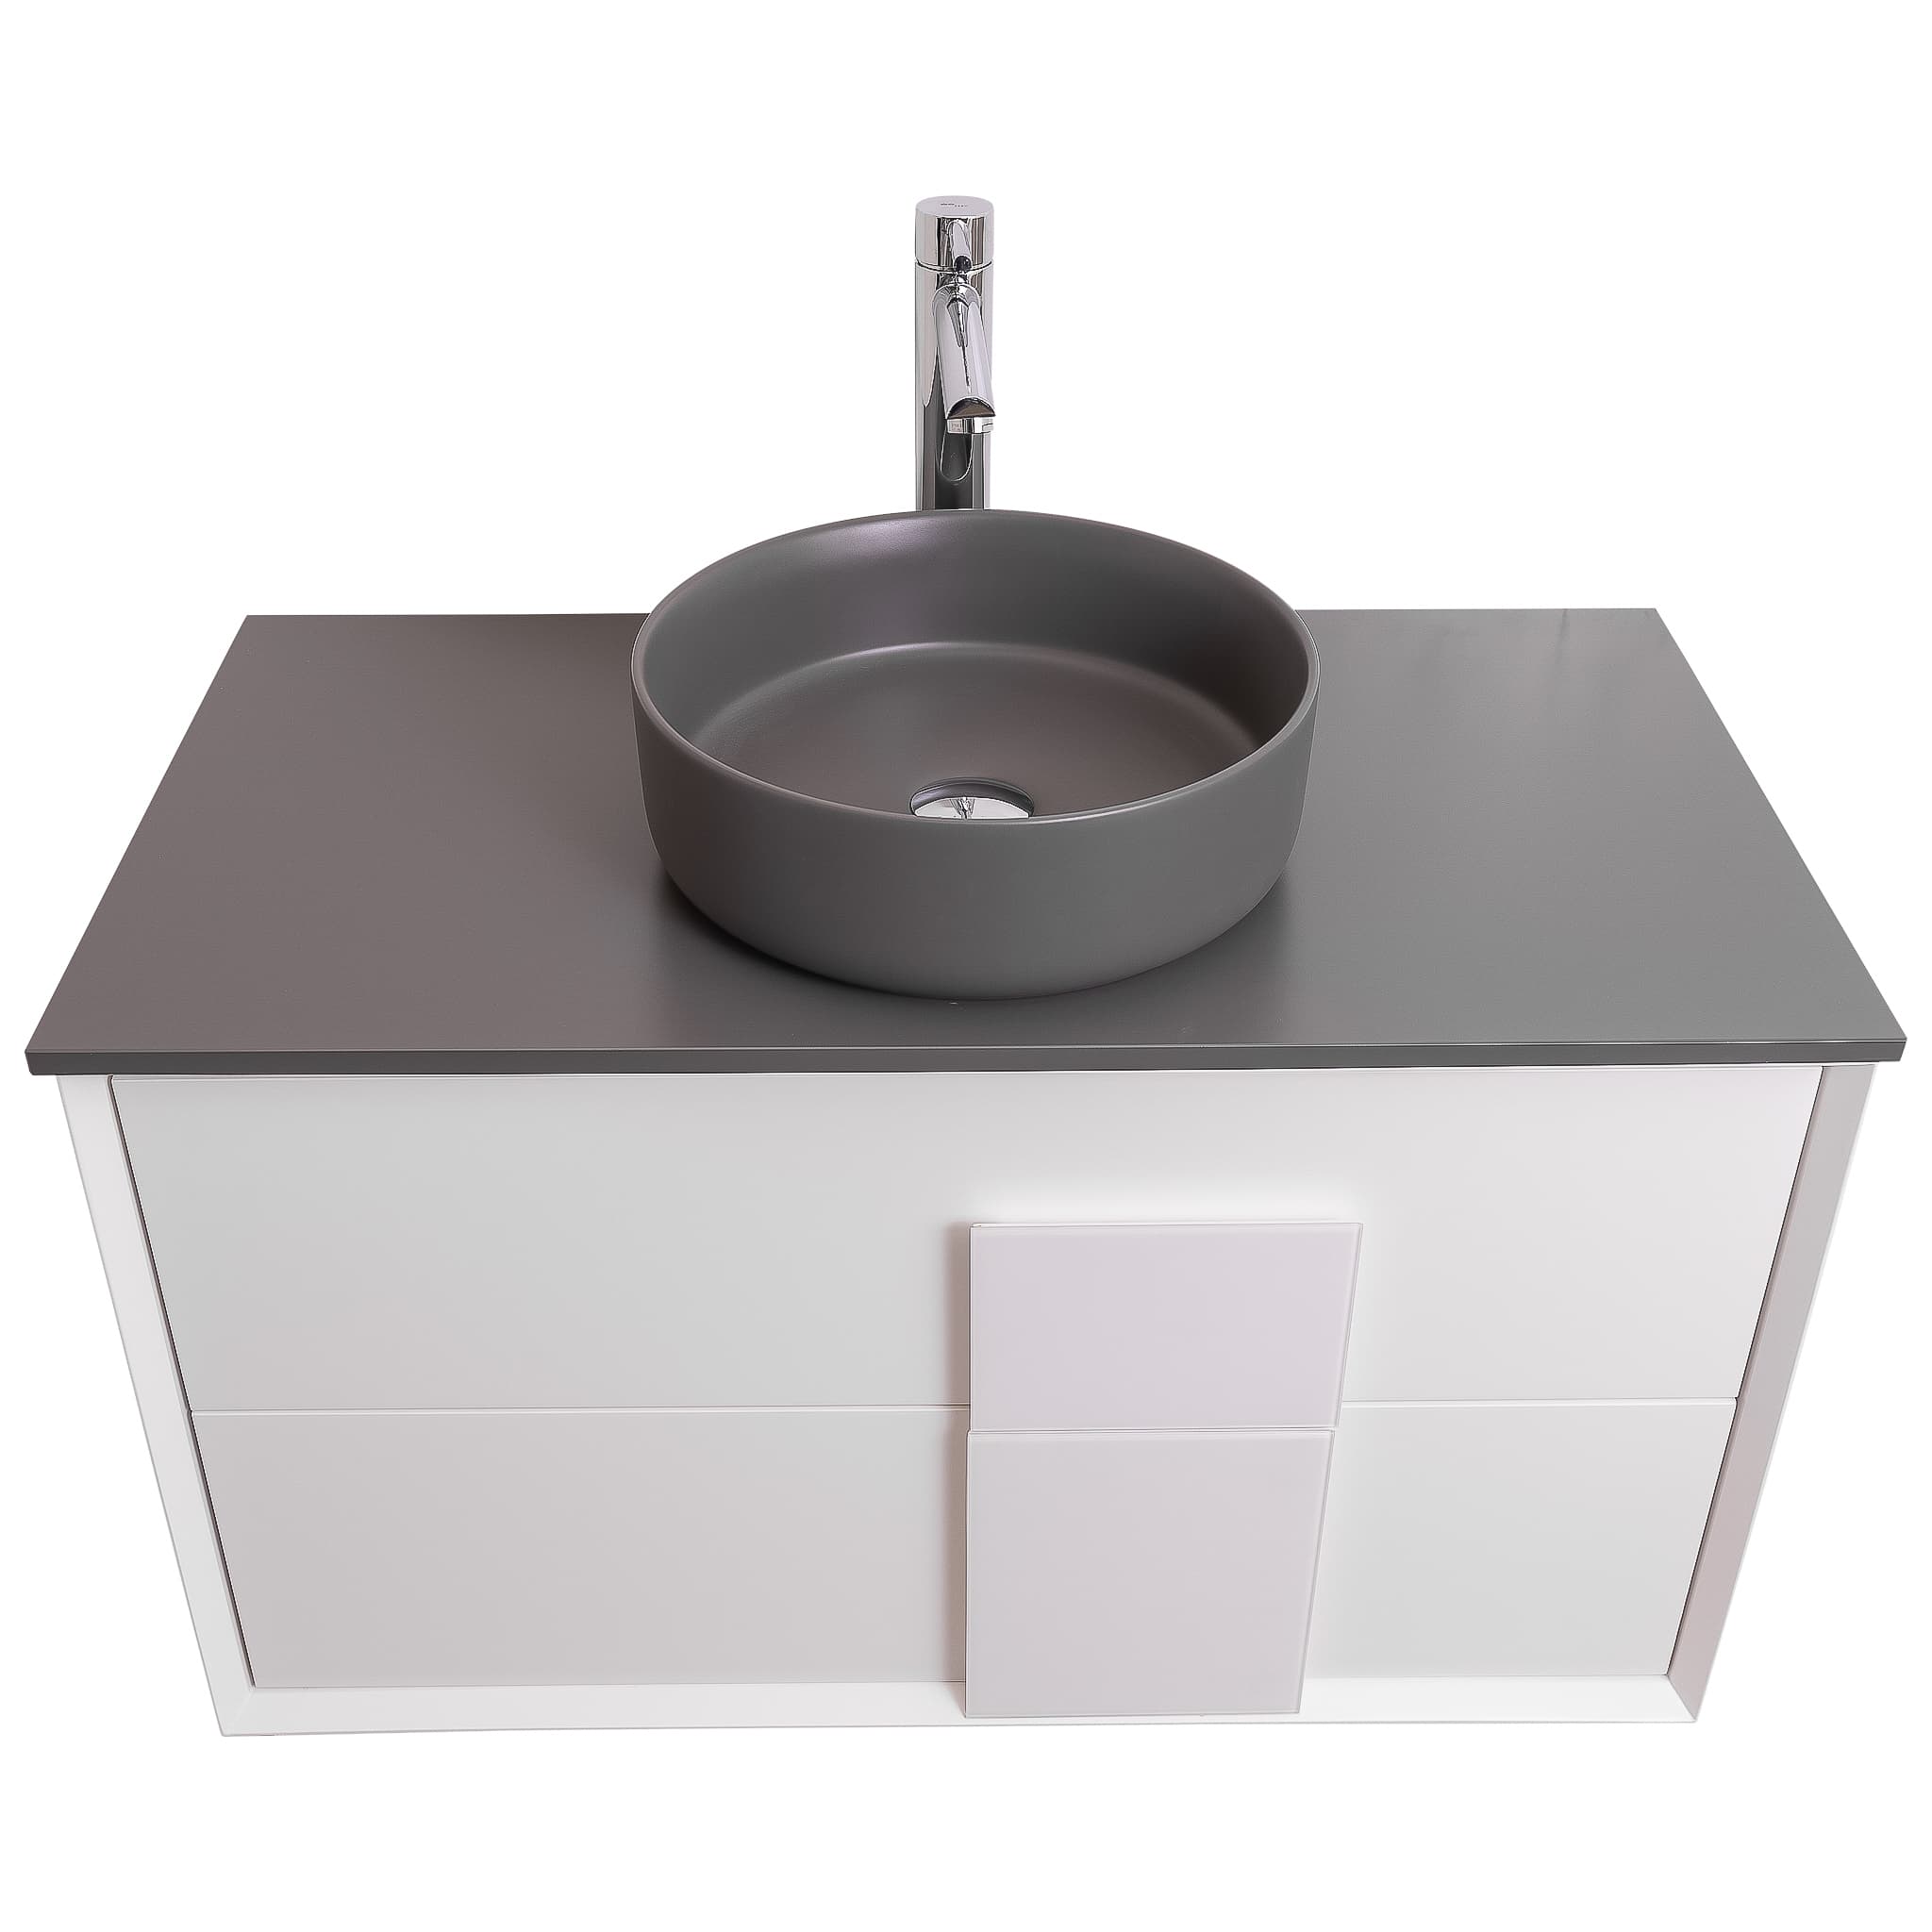 Piazza 31.5 Matte White With White Handle Cabinet, Ares Grey Ceniza Top and Ares Grey Ceniza Ceramic Basin, Wall Mounted Modern Vanity Set